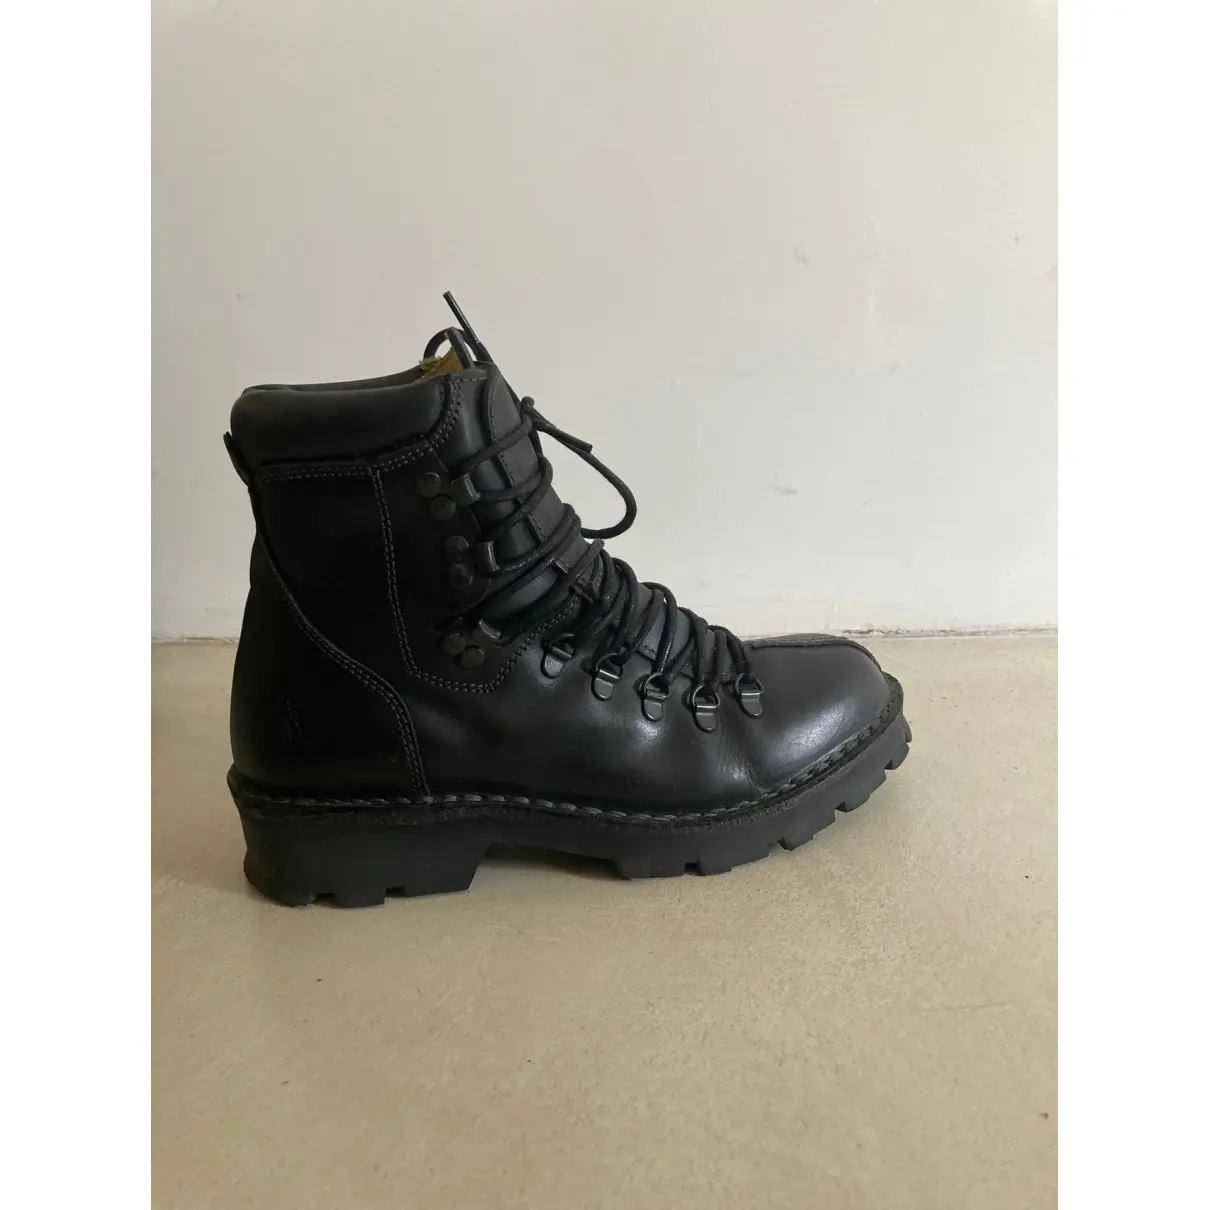 Buy Fly girl Leather lace up boots online